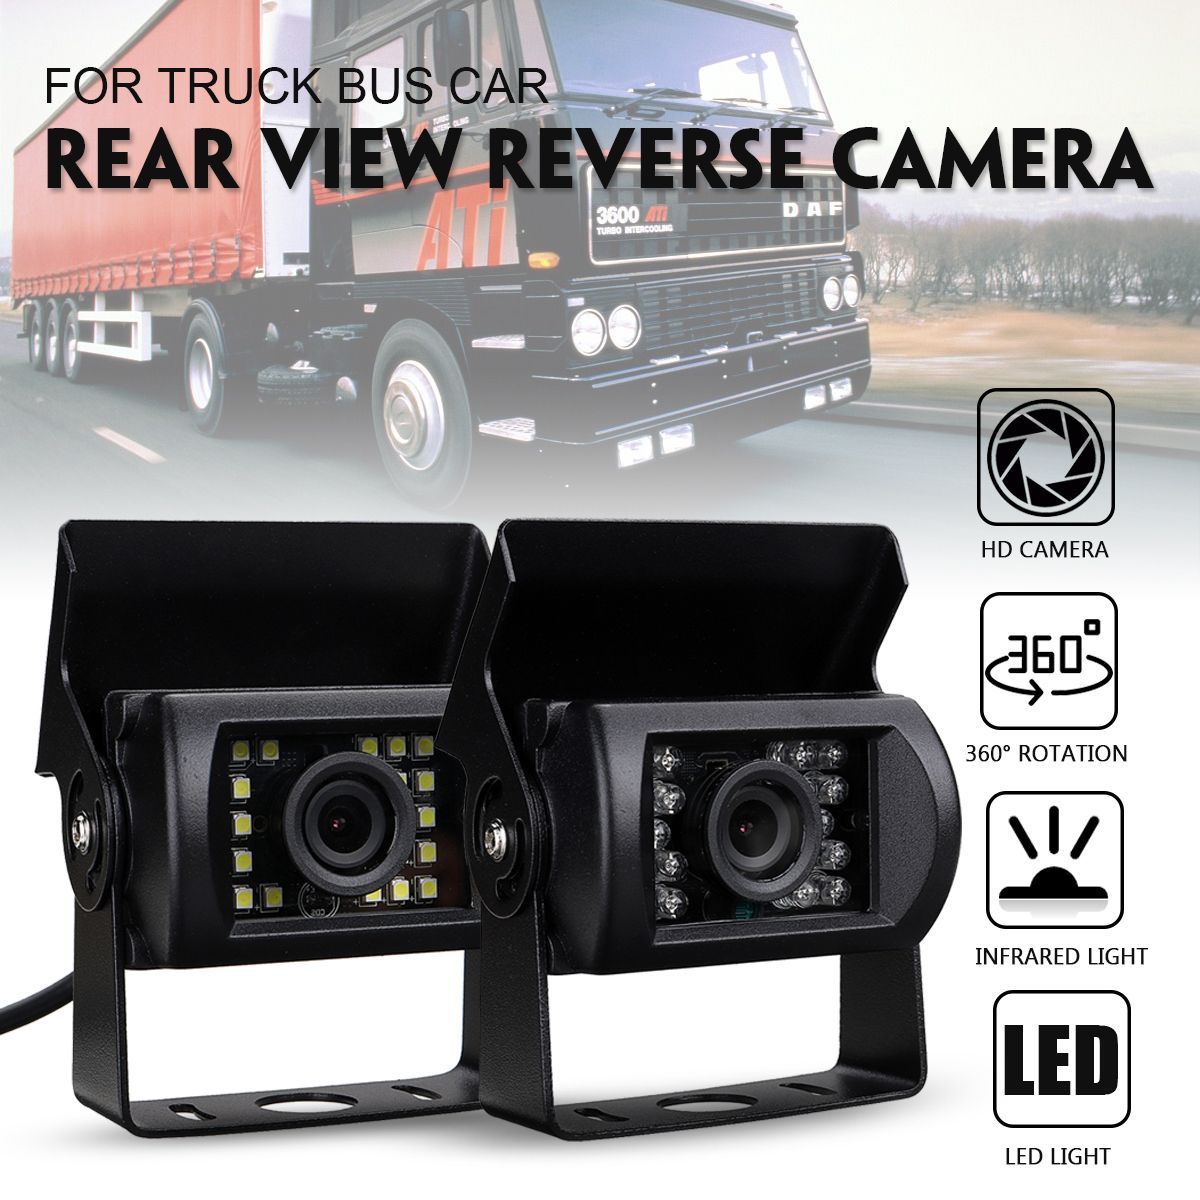 Waterproof-Shockproof-Car-Rear-View-Reversing-HD-Infrared-Lights-Night-Vision-Camera-With-AV-Cable-1342397